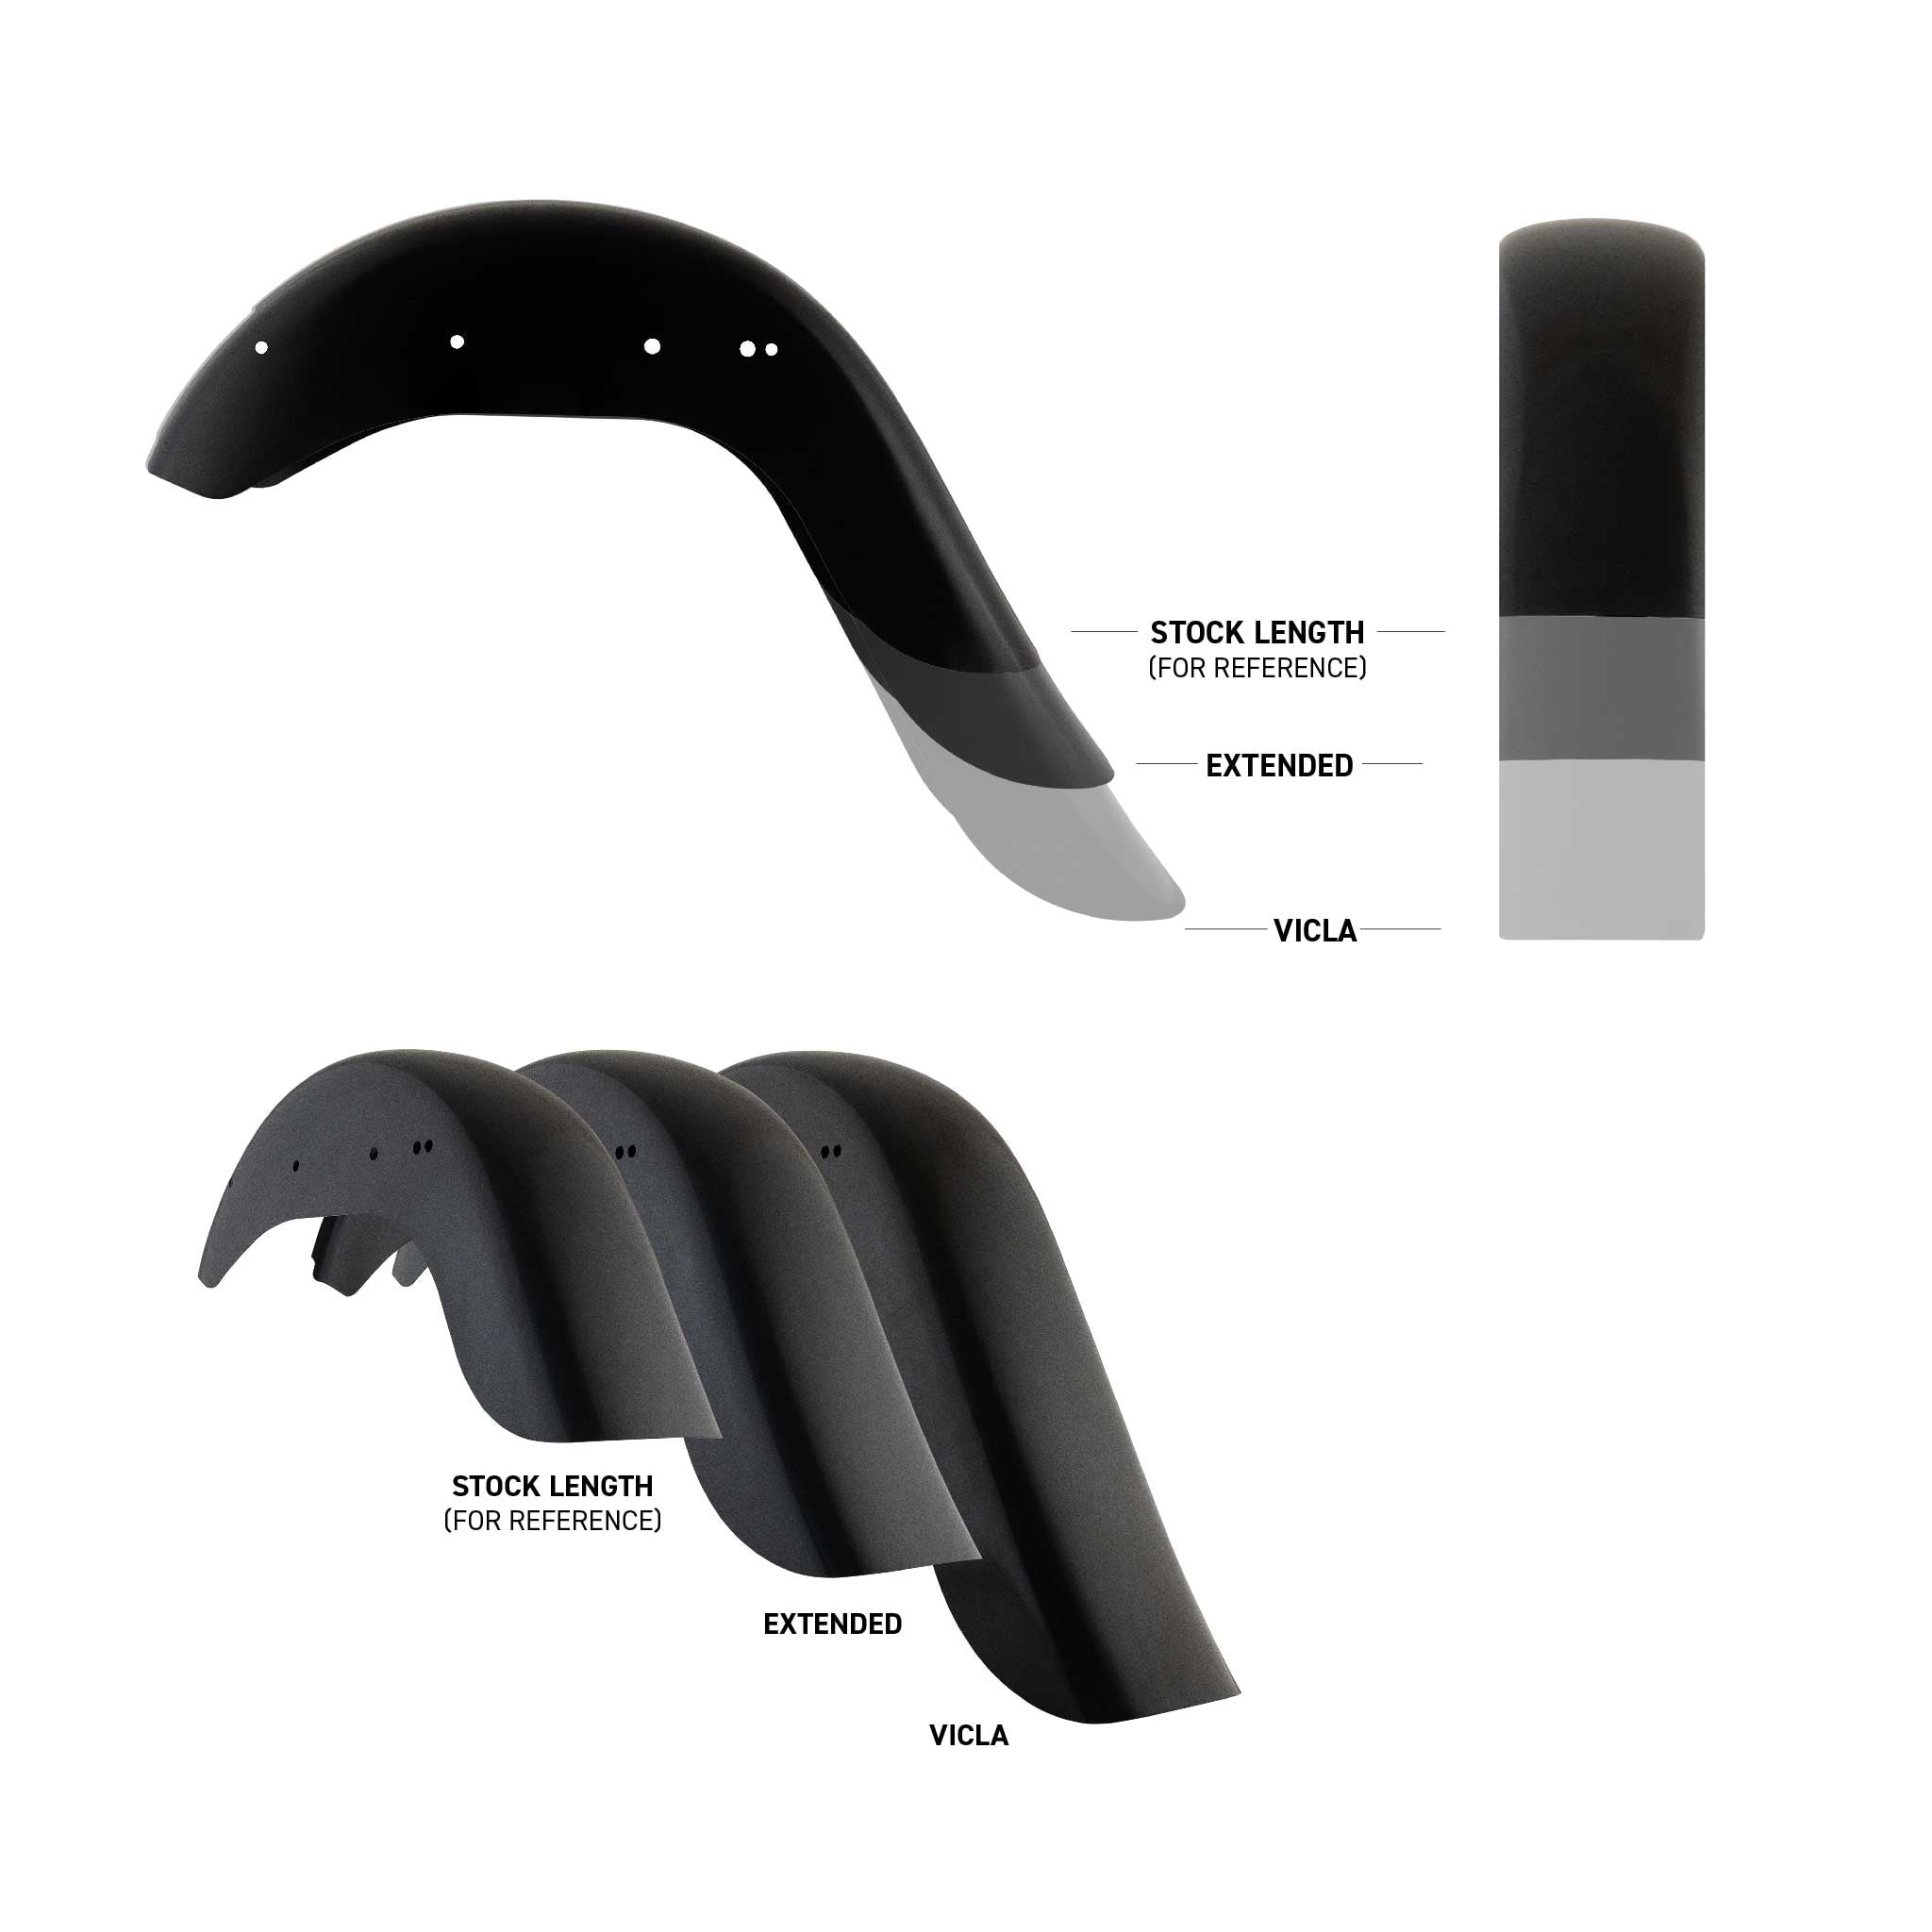 Benchmark Rear Fenders for Harley-Davidson 2000-2017 Softail Motorcycles(Rear Fender Size Comparisons)